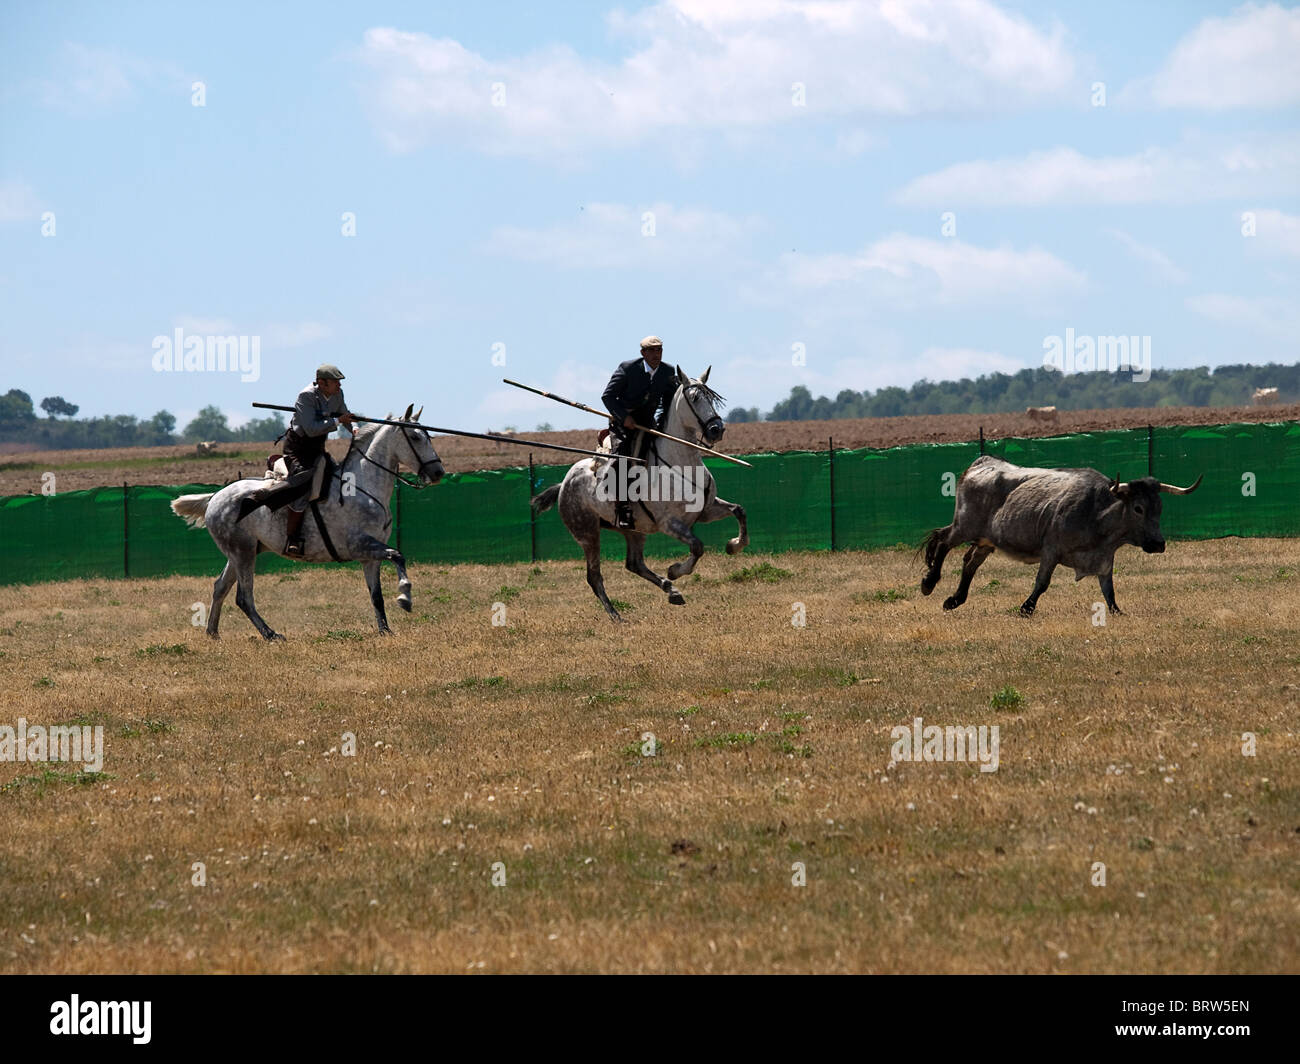 Chasing the bull at an 'Acoso y derribo' event Stock Photo